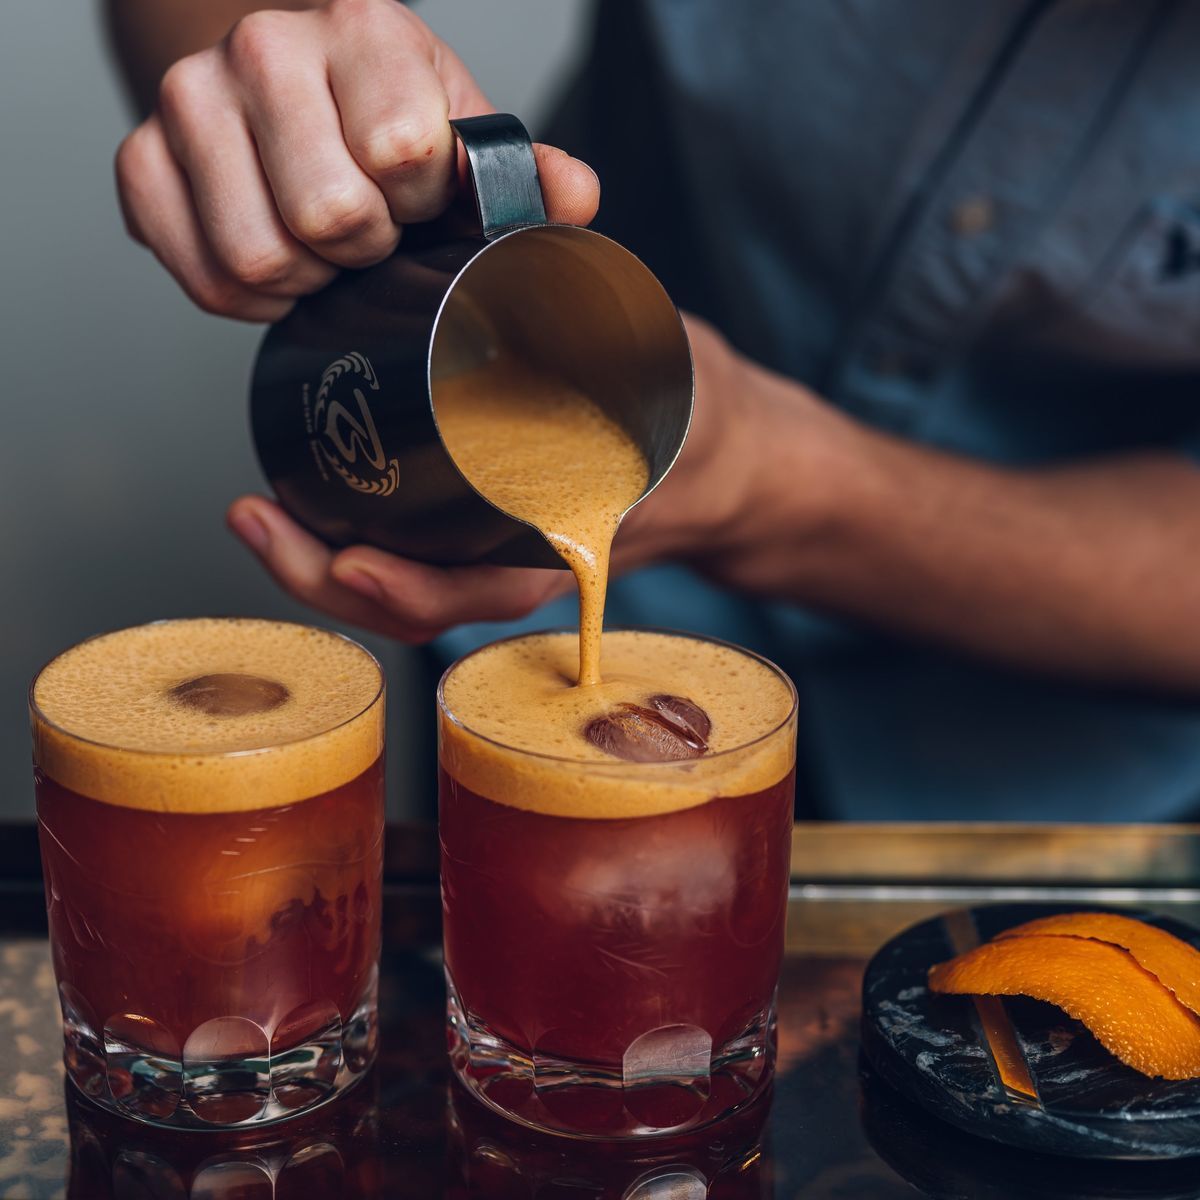 I invented the drink for the Austrian Coffee in Good Spirits Championship.
I work in Coffee Industry and my goals was creating a refreshing aperitivo cocktail for After-work Coffee Shops.